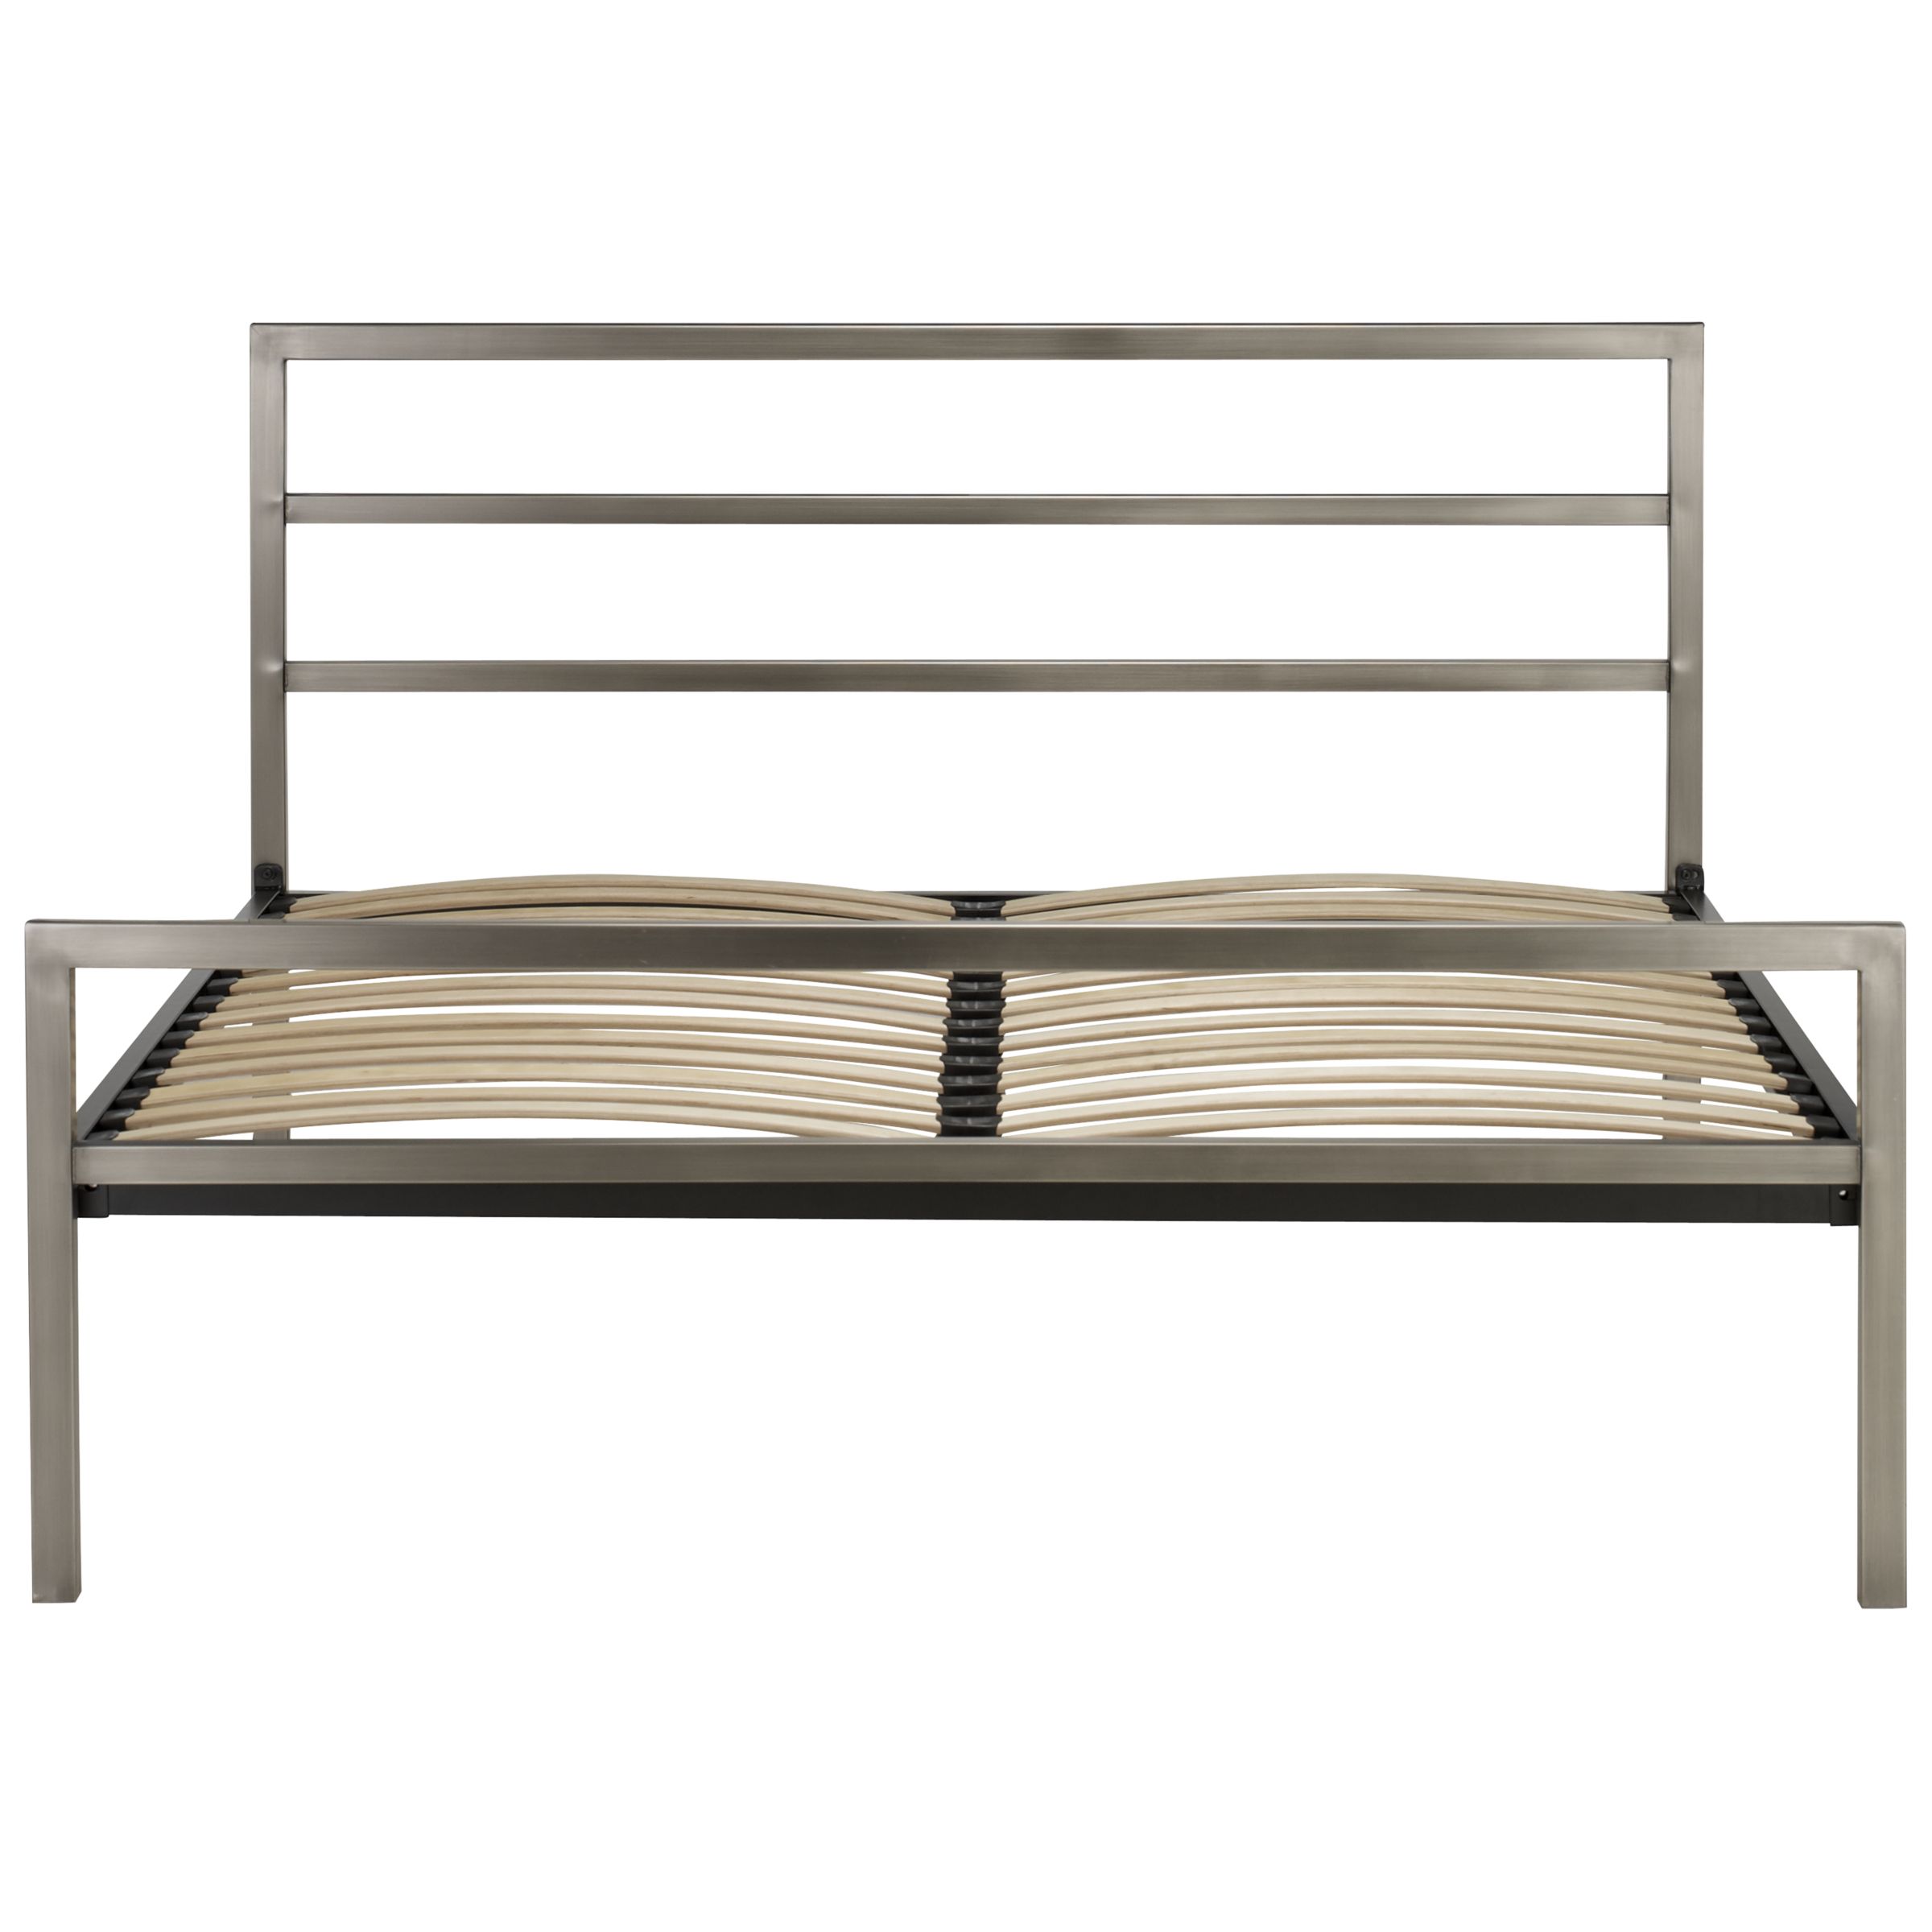 Sherford Bedstead, Small Double